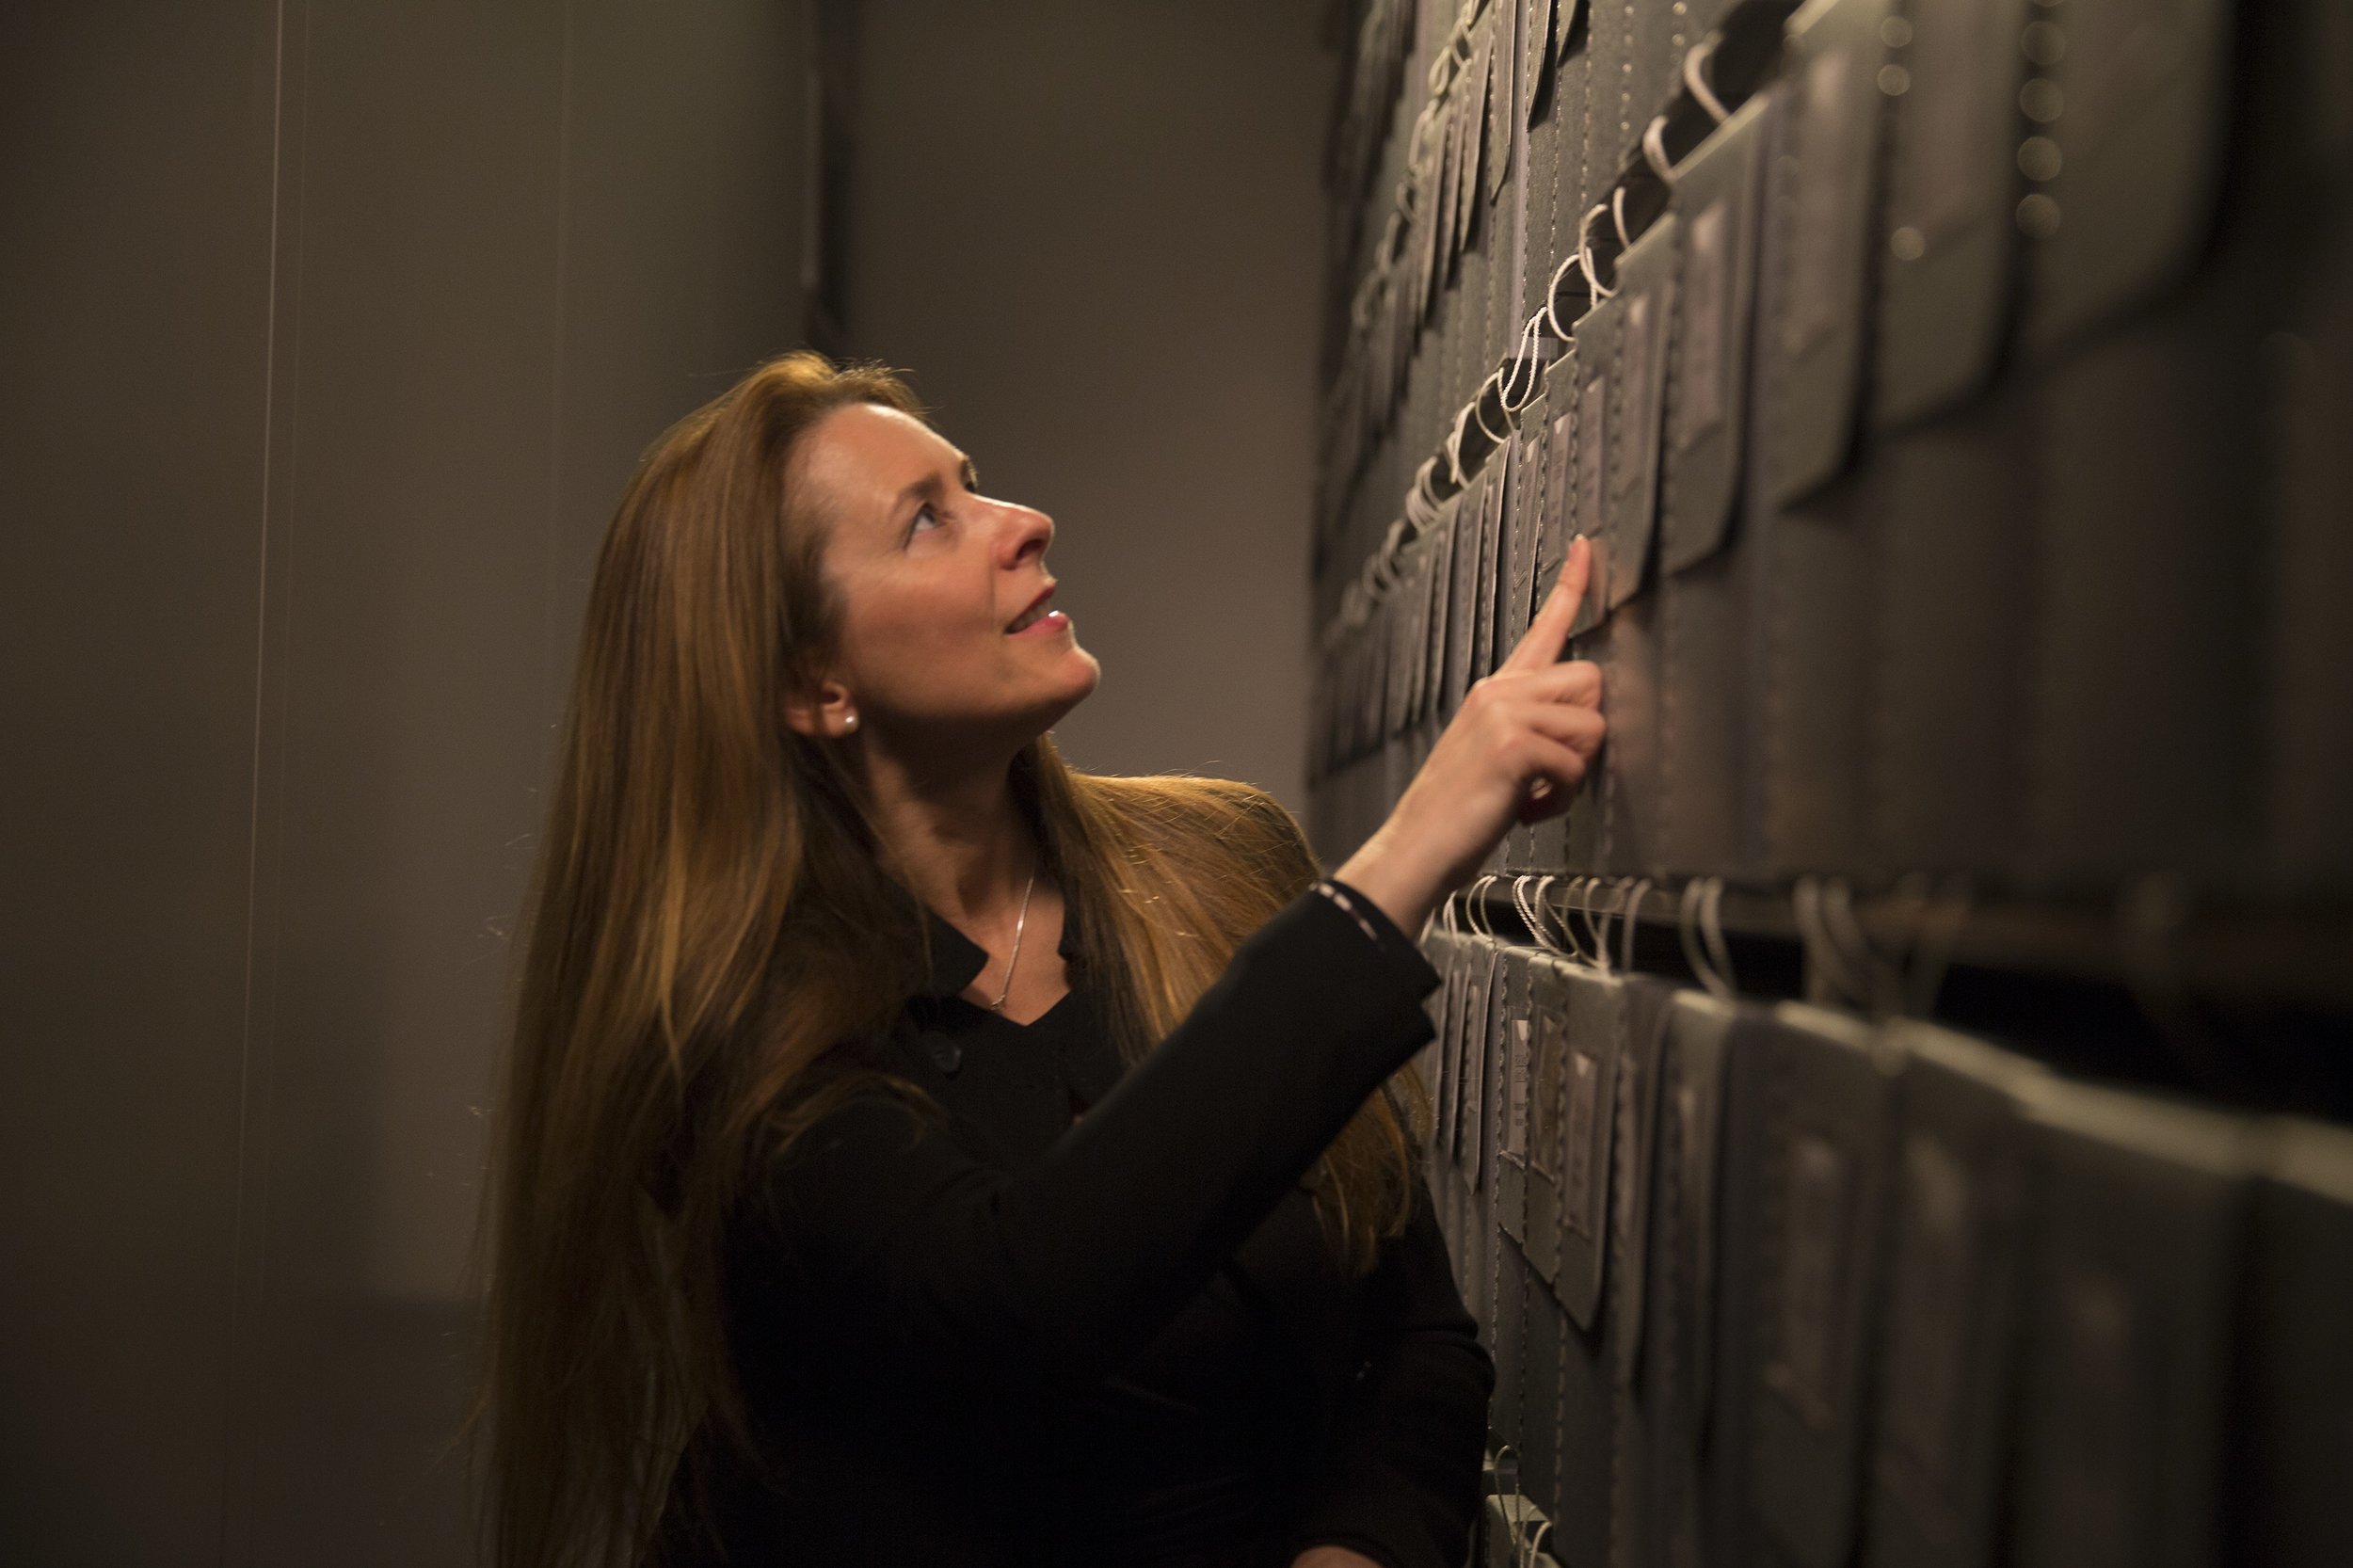  Producer Allison McGourty in the Sony Archives.  ©2017 Lo-Max Records Ltd. 